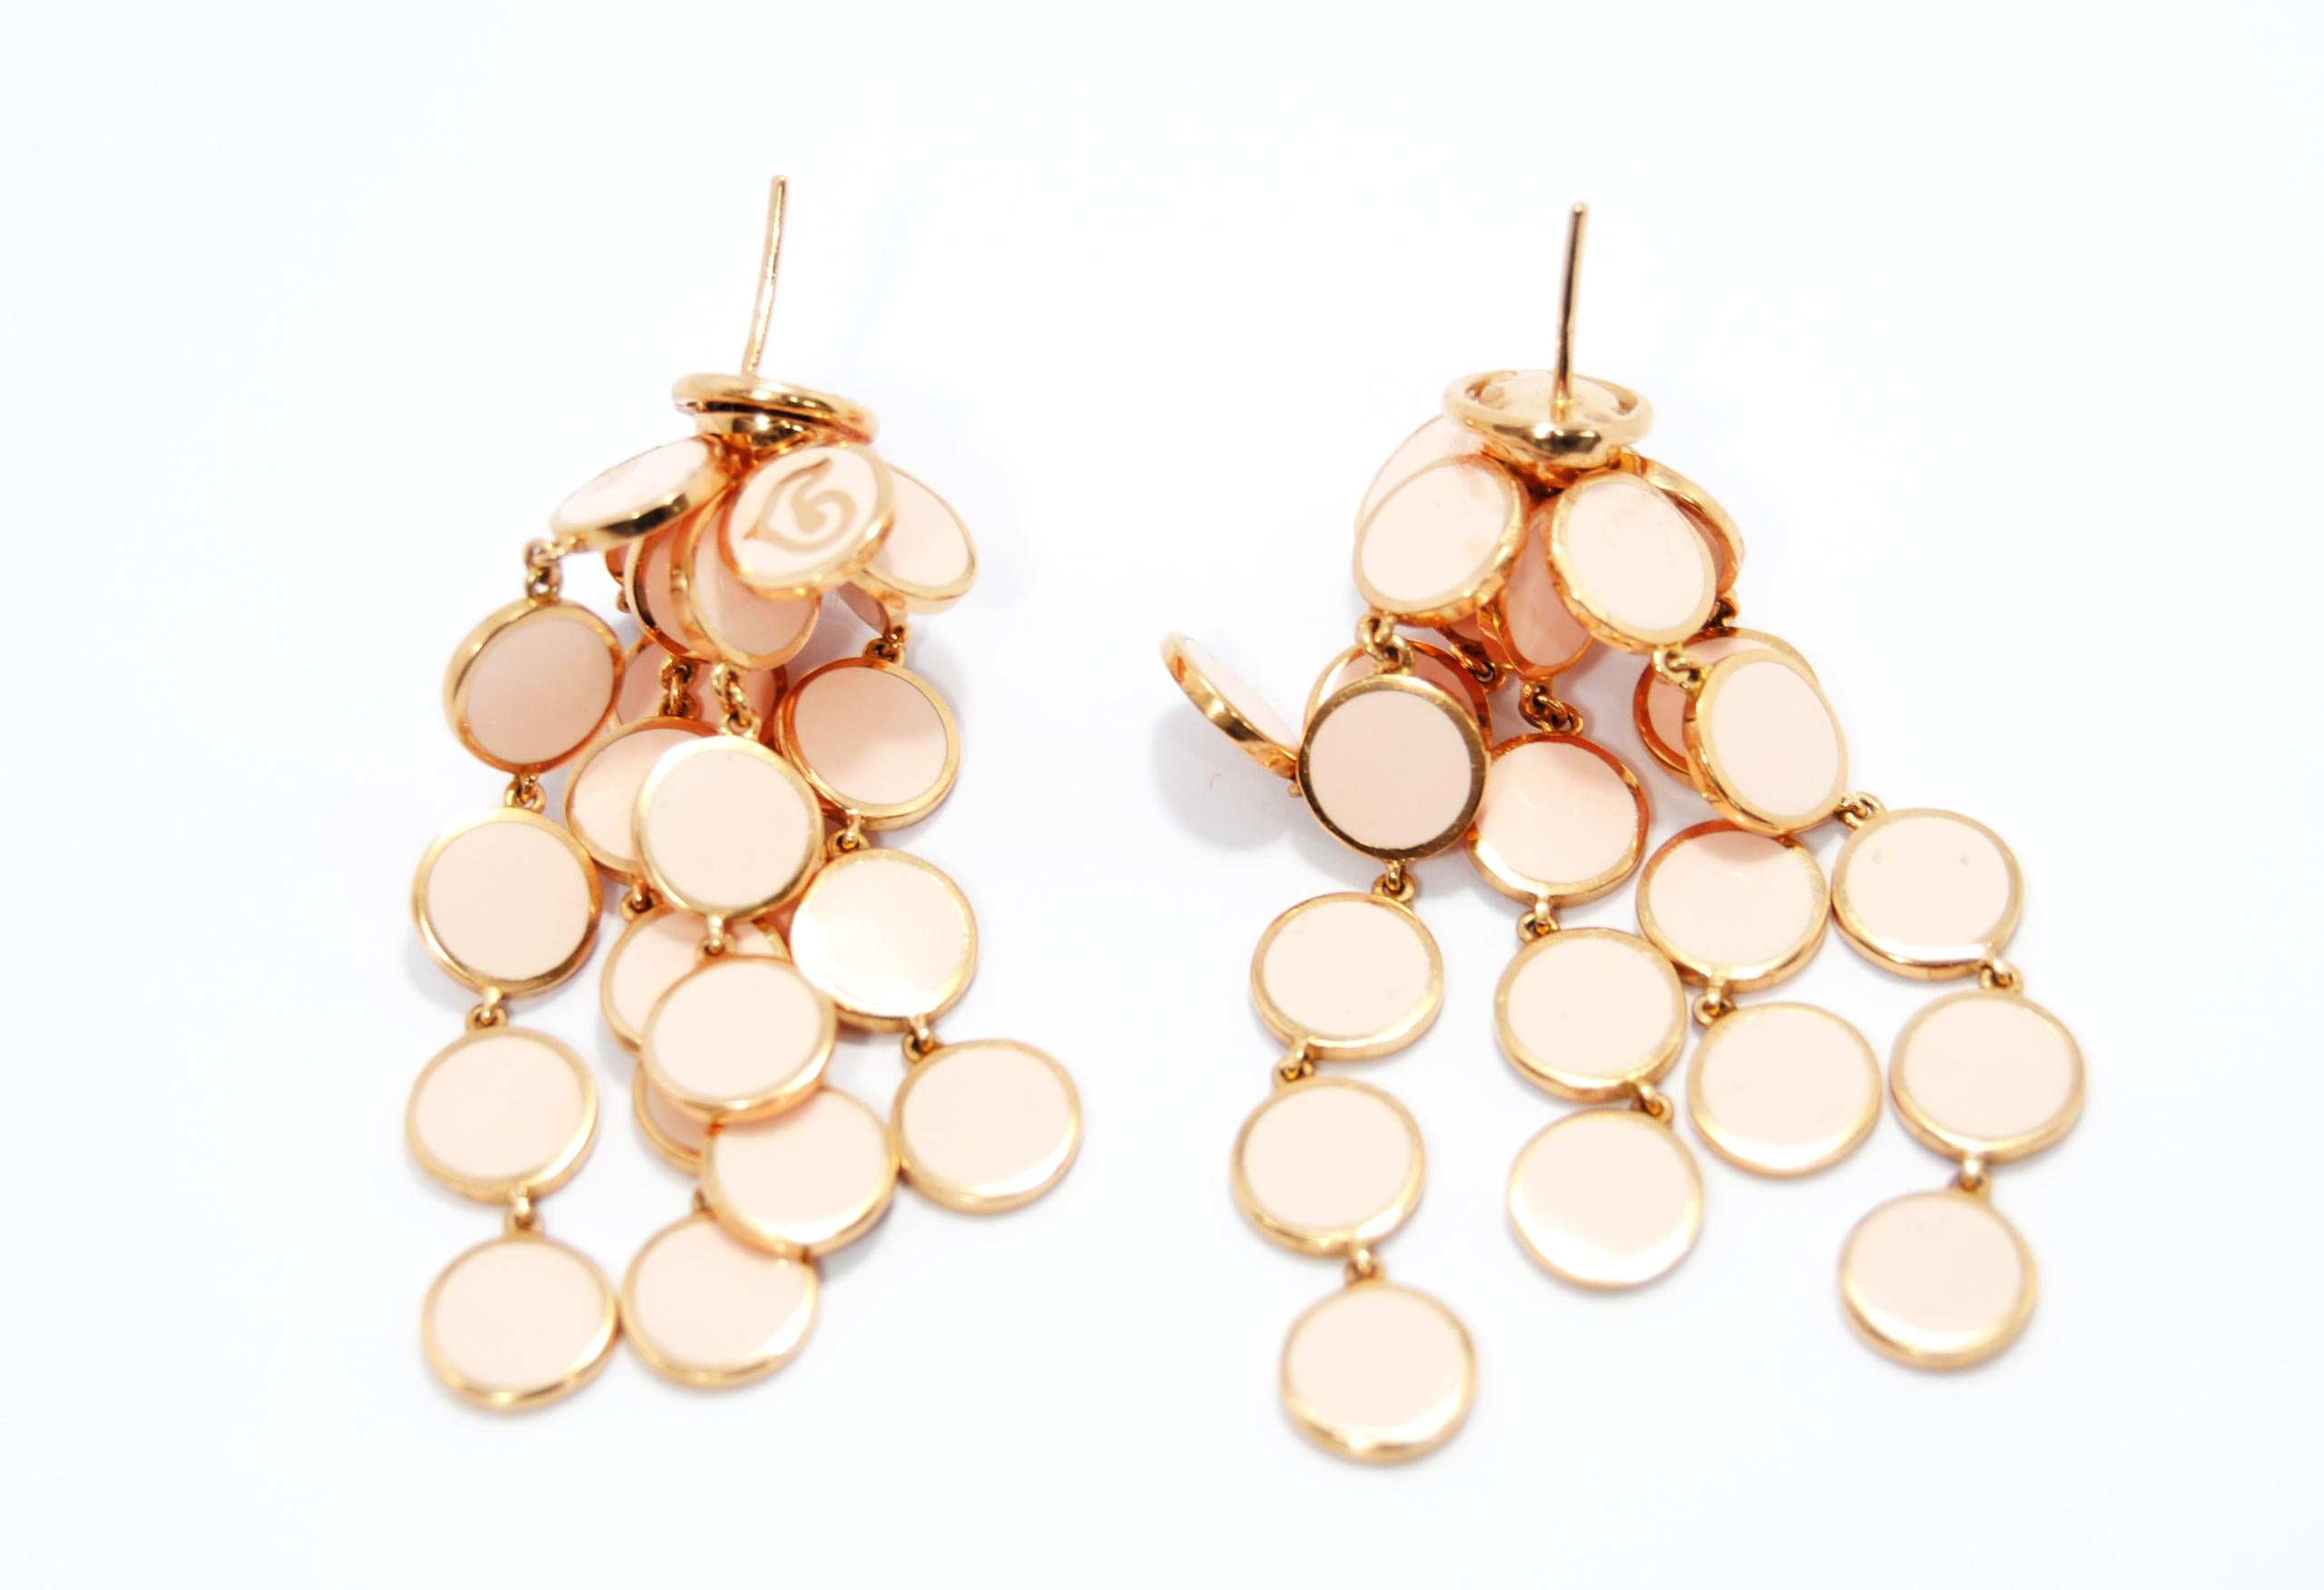 Chantecler Pink Pailletes Earrings, a glitttering cascade of precious petals, enriched by enamels encircled by rose gold 